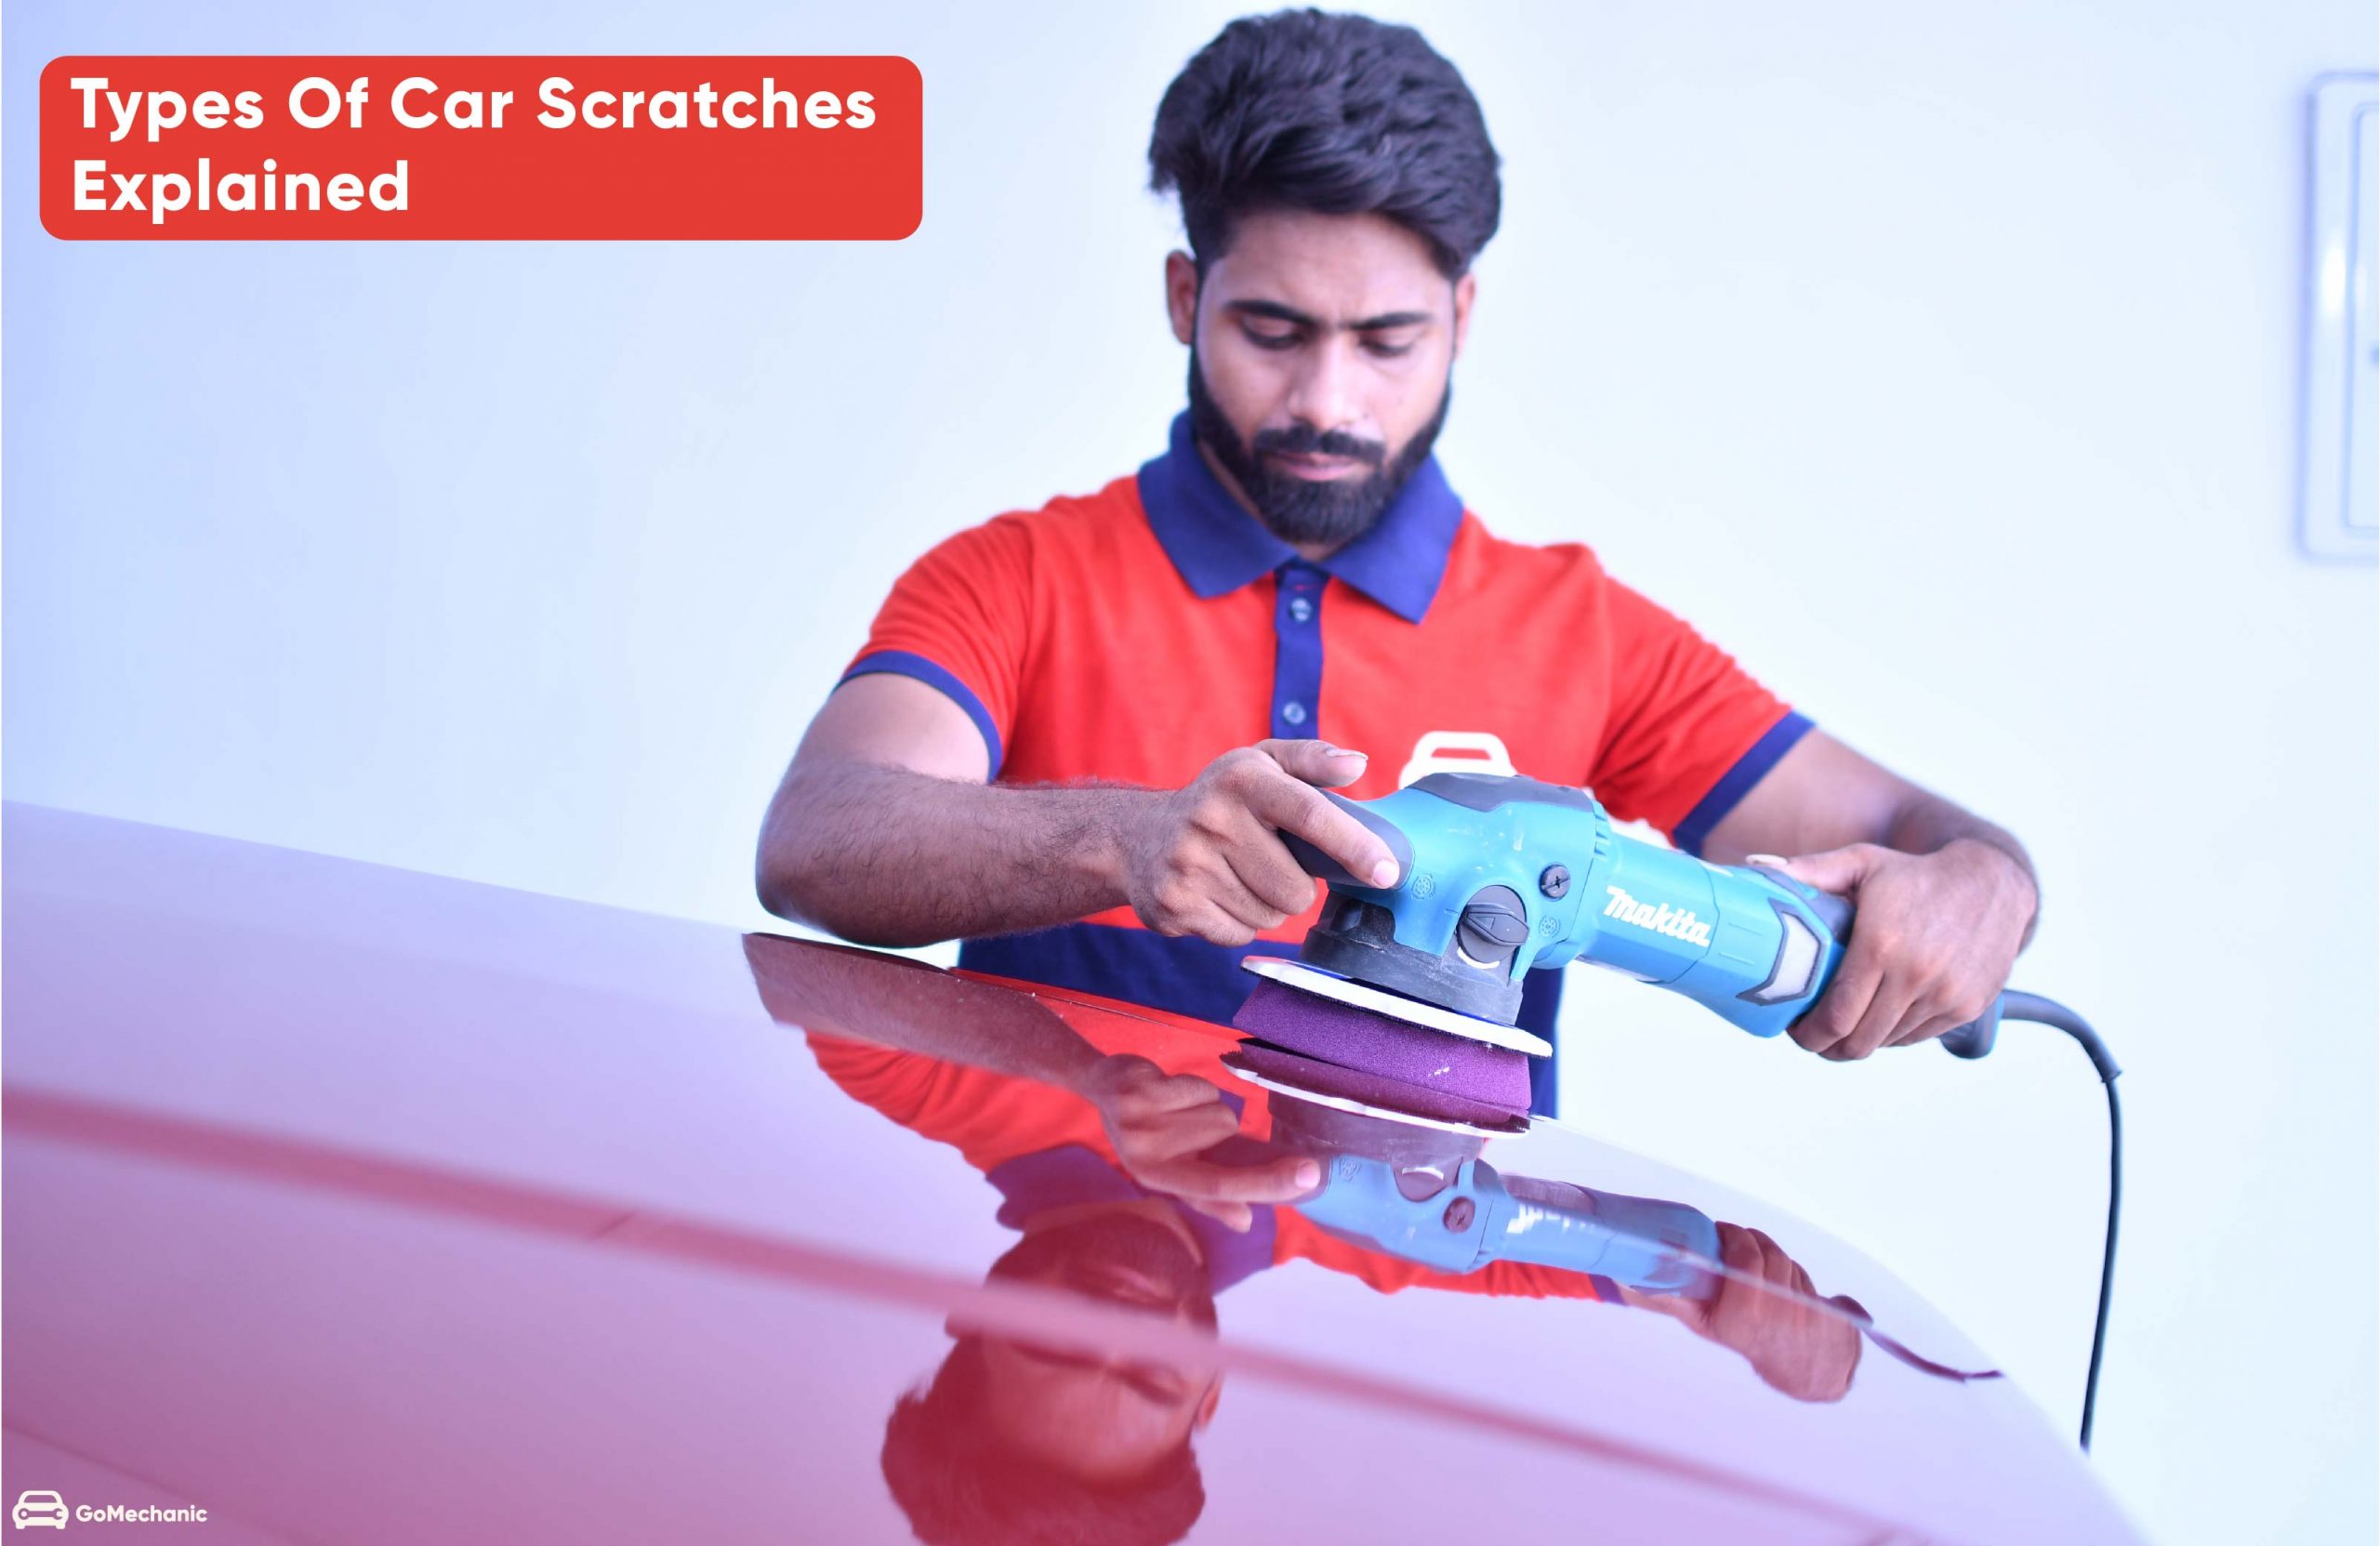 Types Of Car Scratches And Repairs Explained All You Need To Know